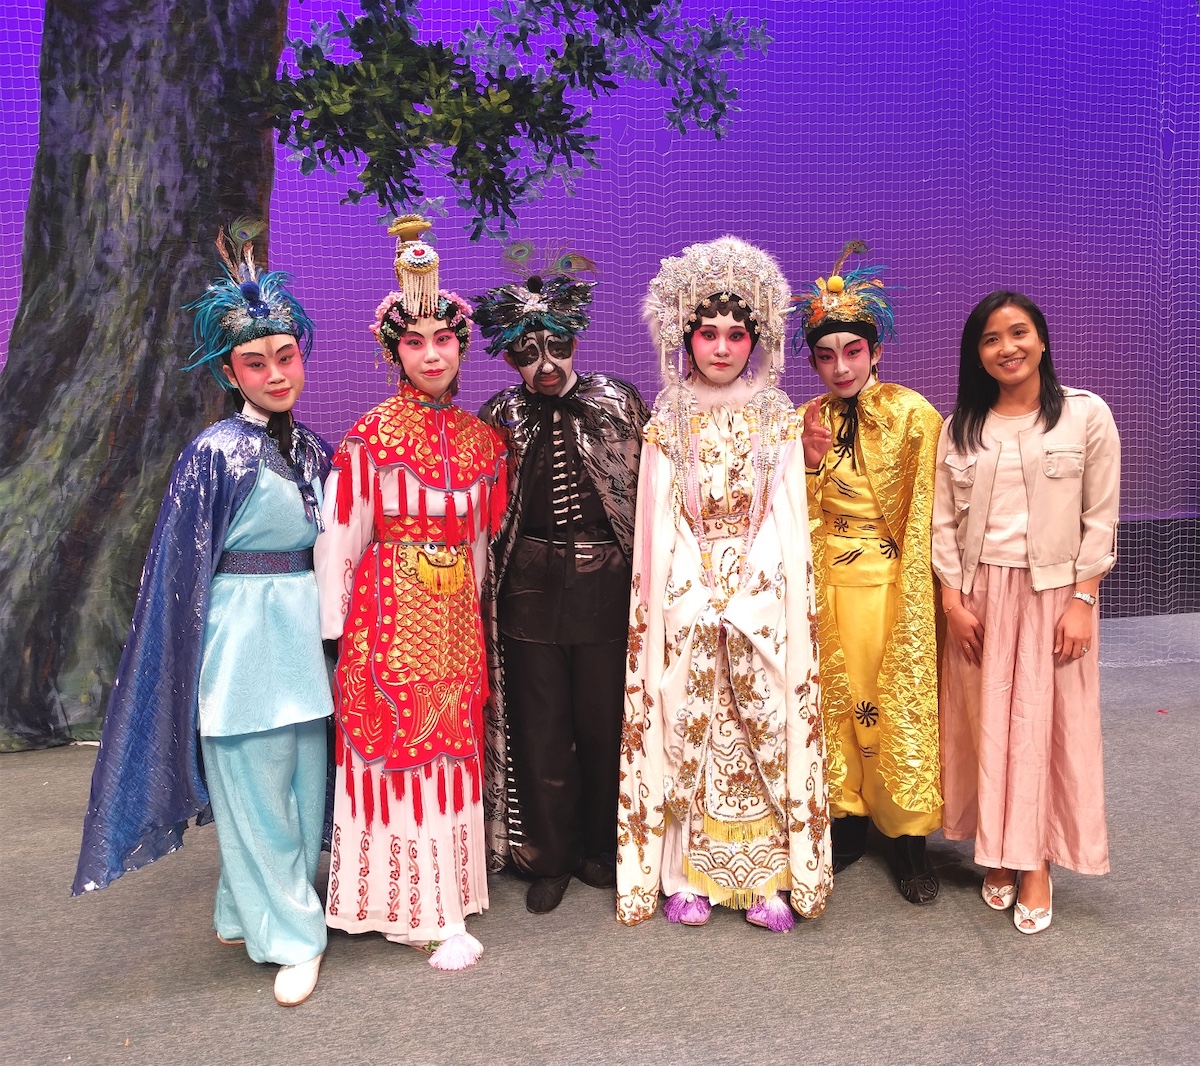 The Director of the Hong Kong Economic and Trade Office (Toronto), Ms Emily Mo (right), is pictured with the Cantonese opera starlets of the Starlight Chinese Opera Performing Arts Centre after the Cantonese opera performance at Flato Markham Theatre in Markham on July 24.